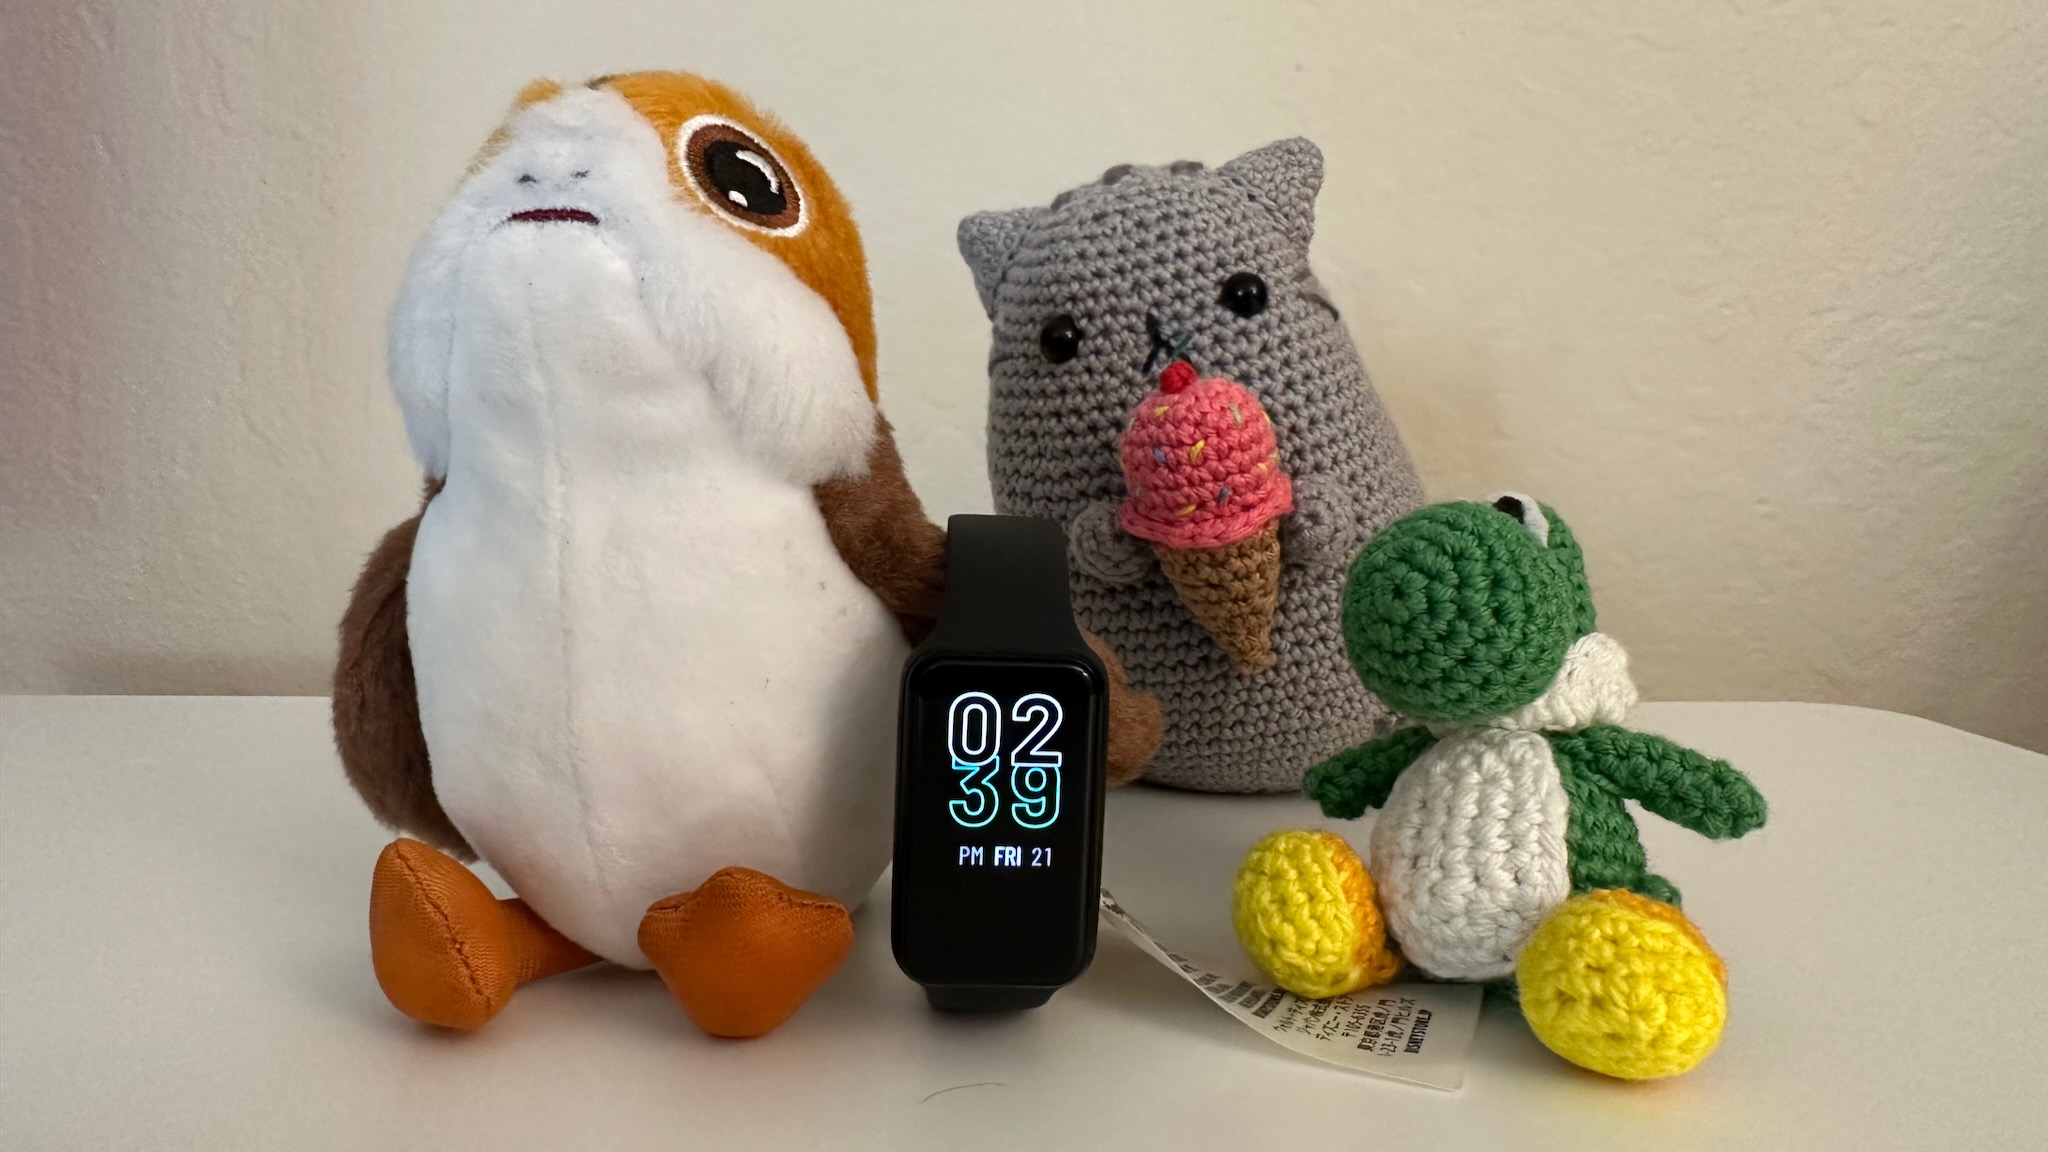 The Amazfit Band 7 sitting next to small stuffed animals to show its petite size.